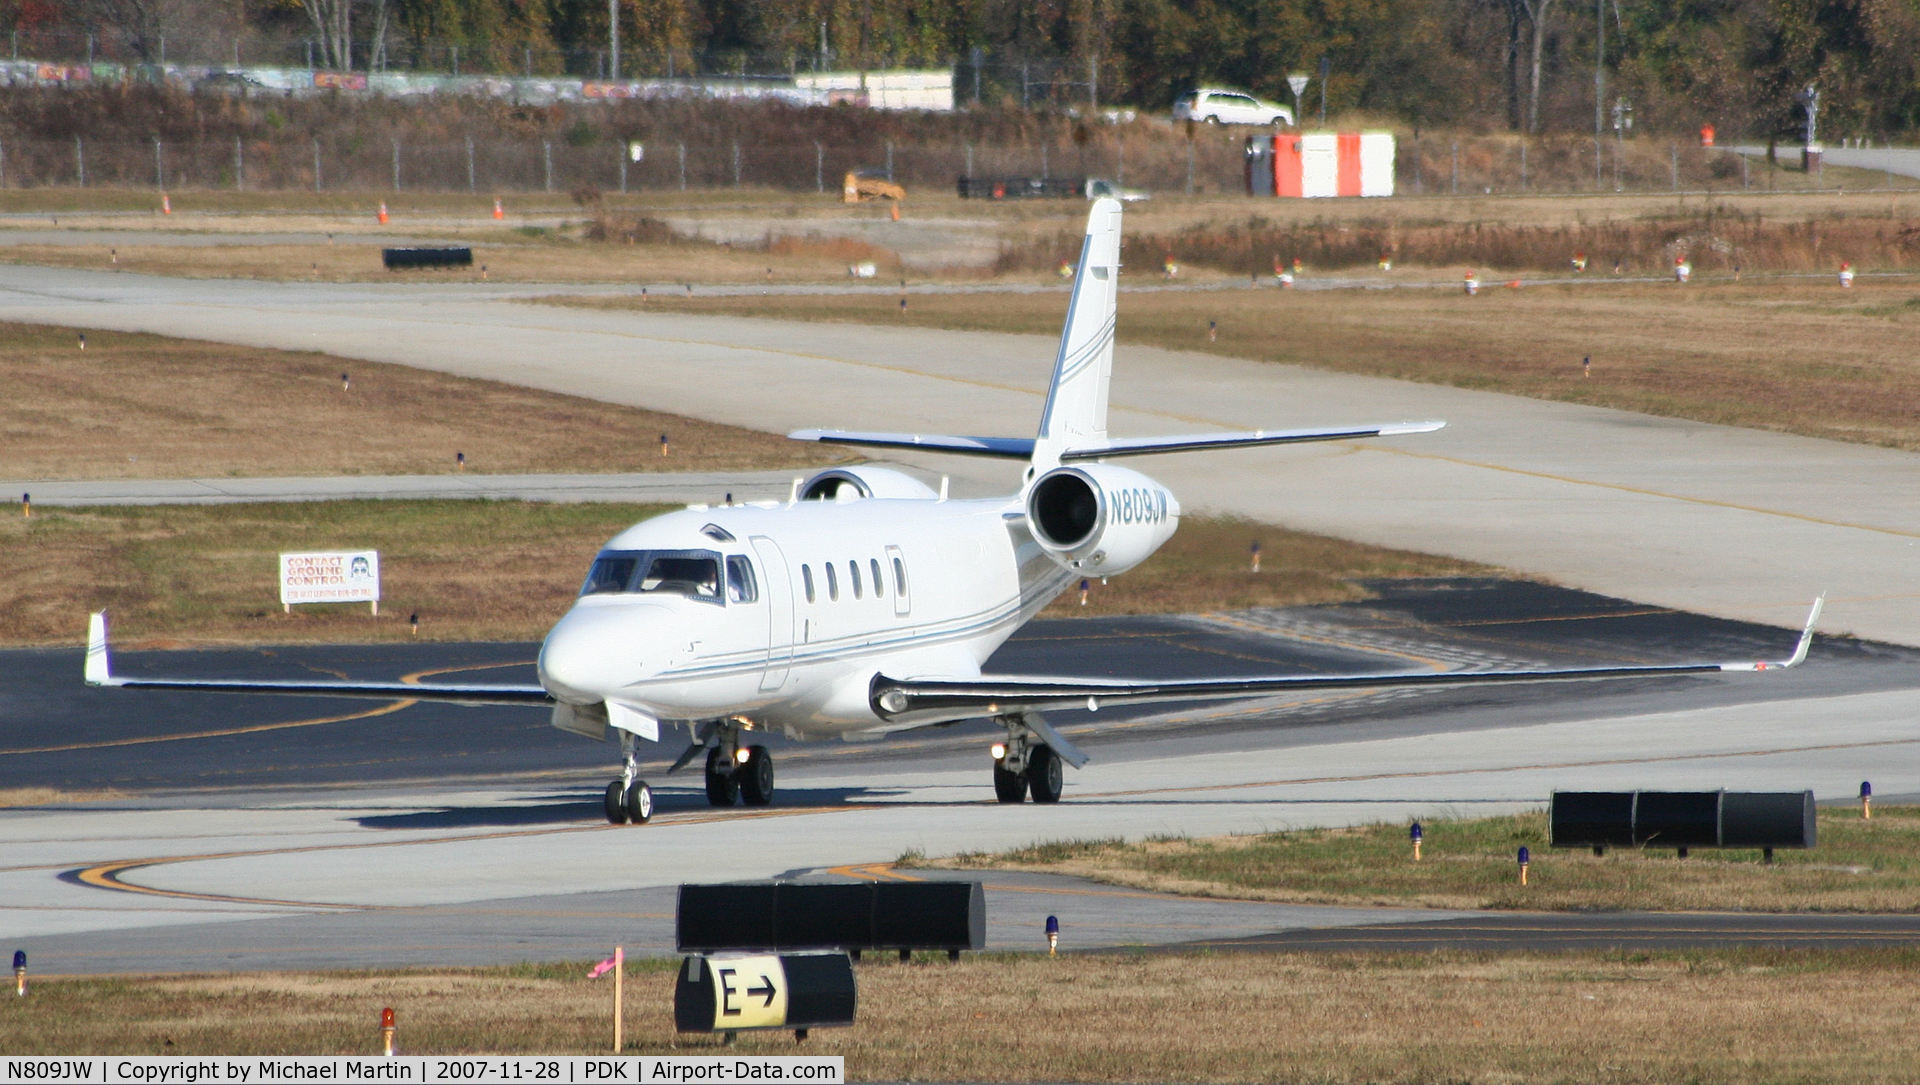 N809JW, 2001 Israel Aircraft Industries ASTRA SPX C/N 135, Taxing to Jet Fueling